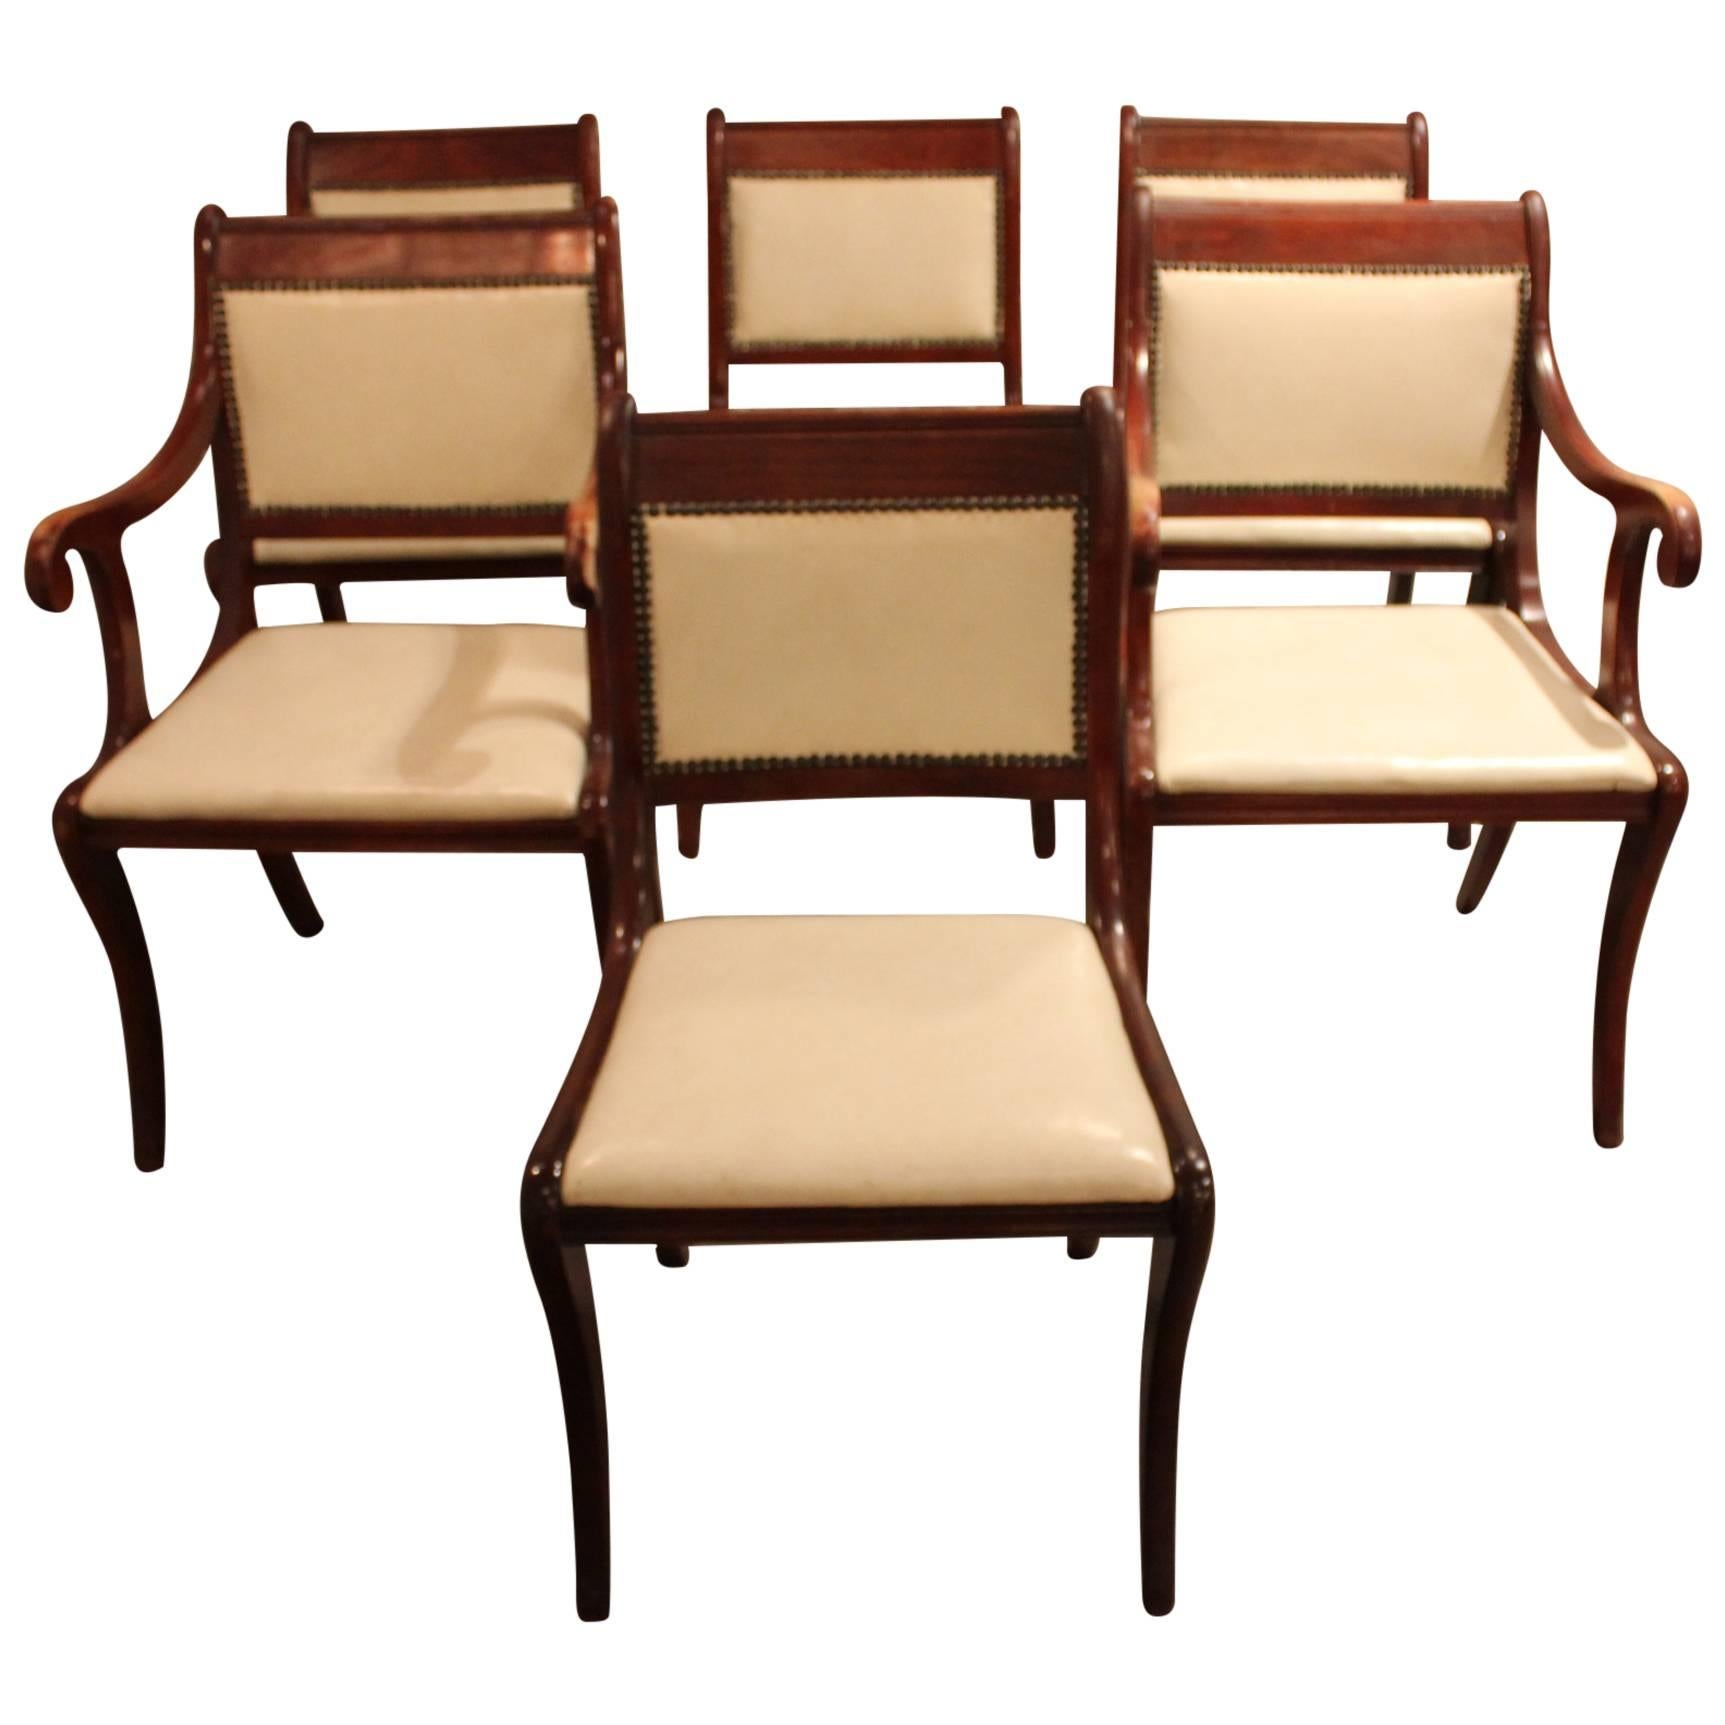 Set of Six Vintage Regency Style Dining Chairs